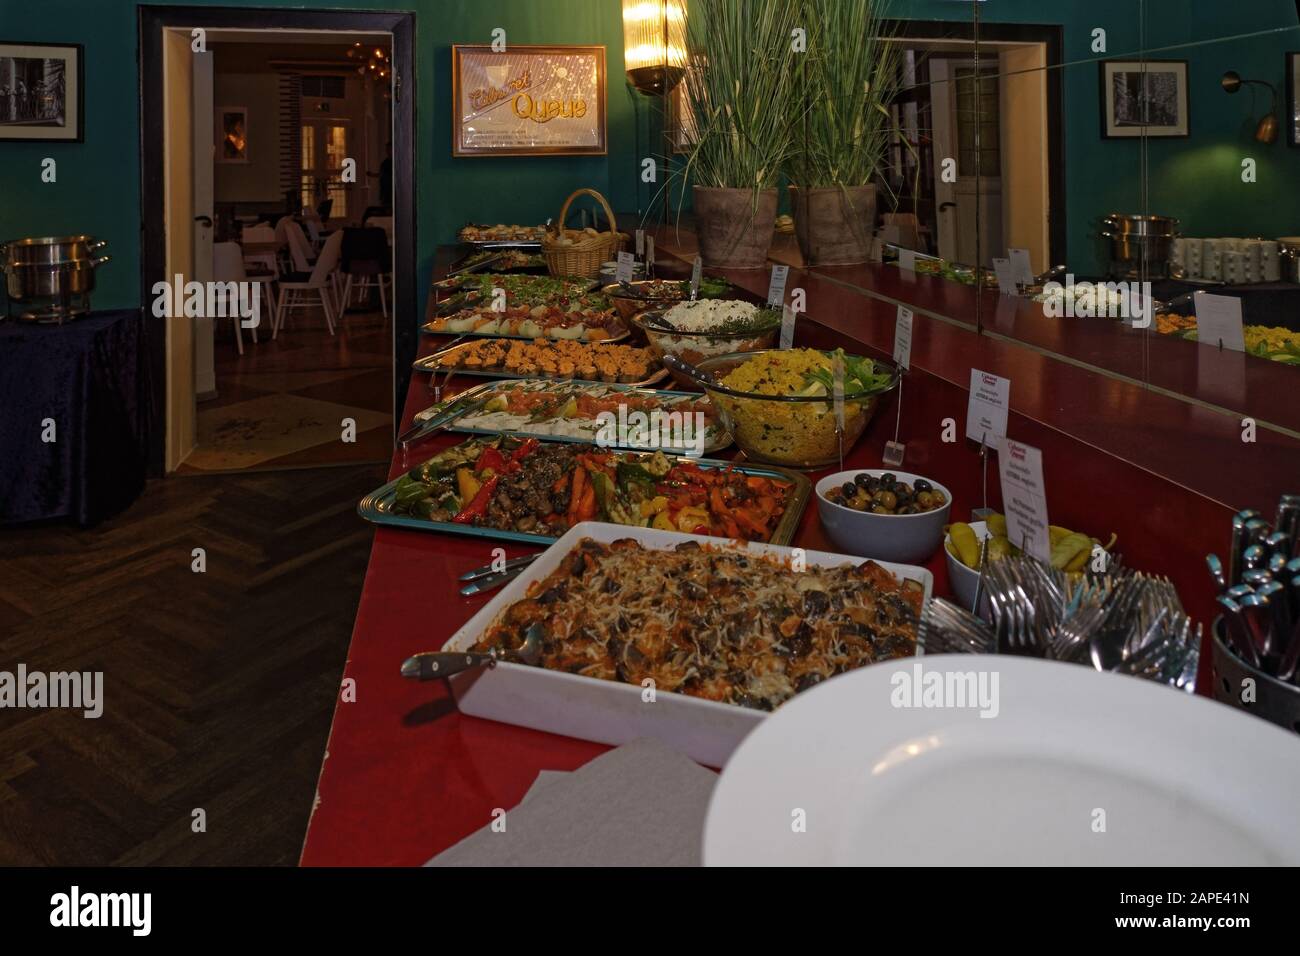 A Beautiful Shot Of Delicious Food Lined Up On A Buffet Table In A